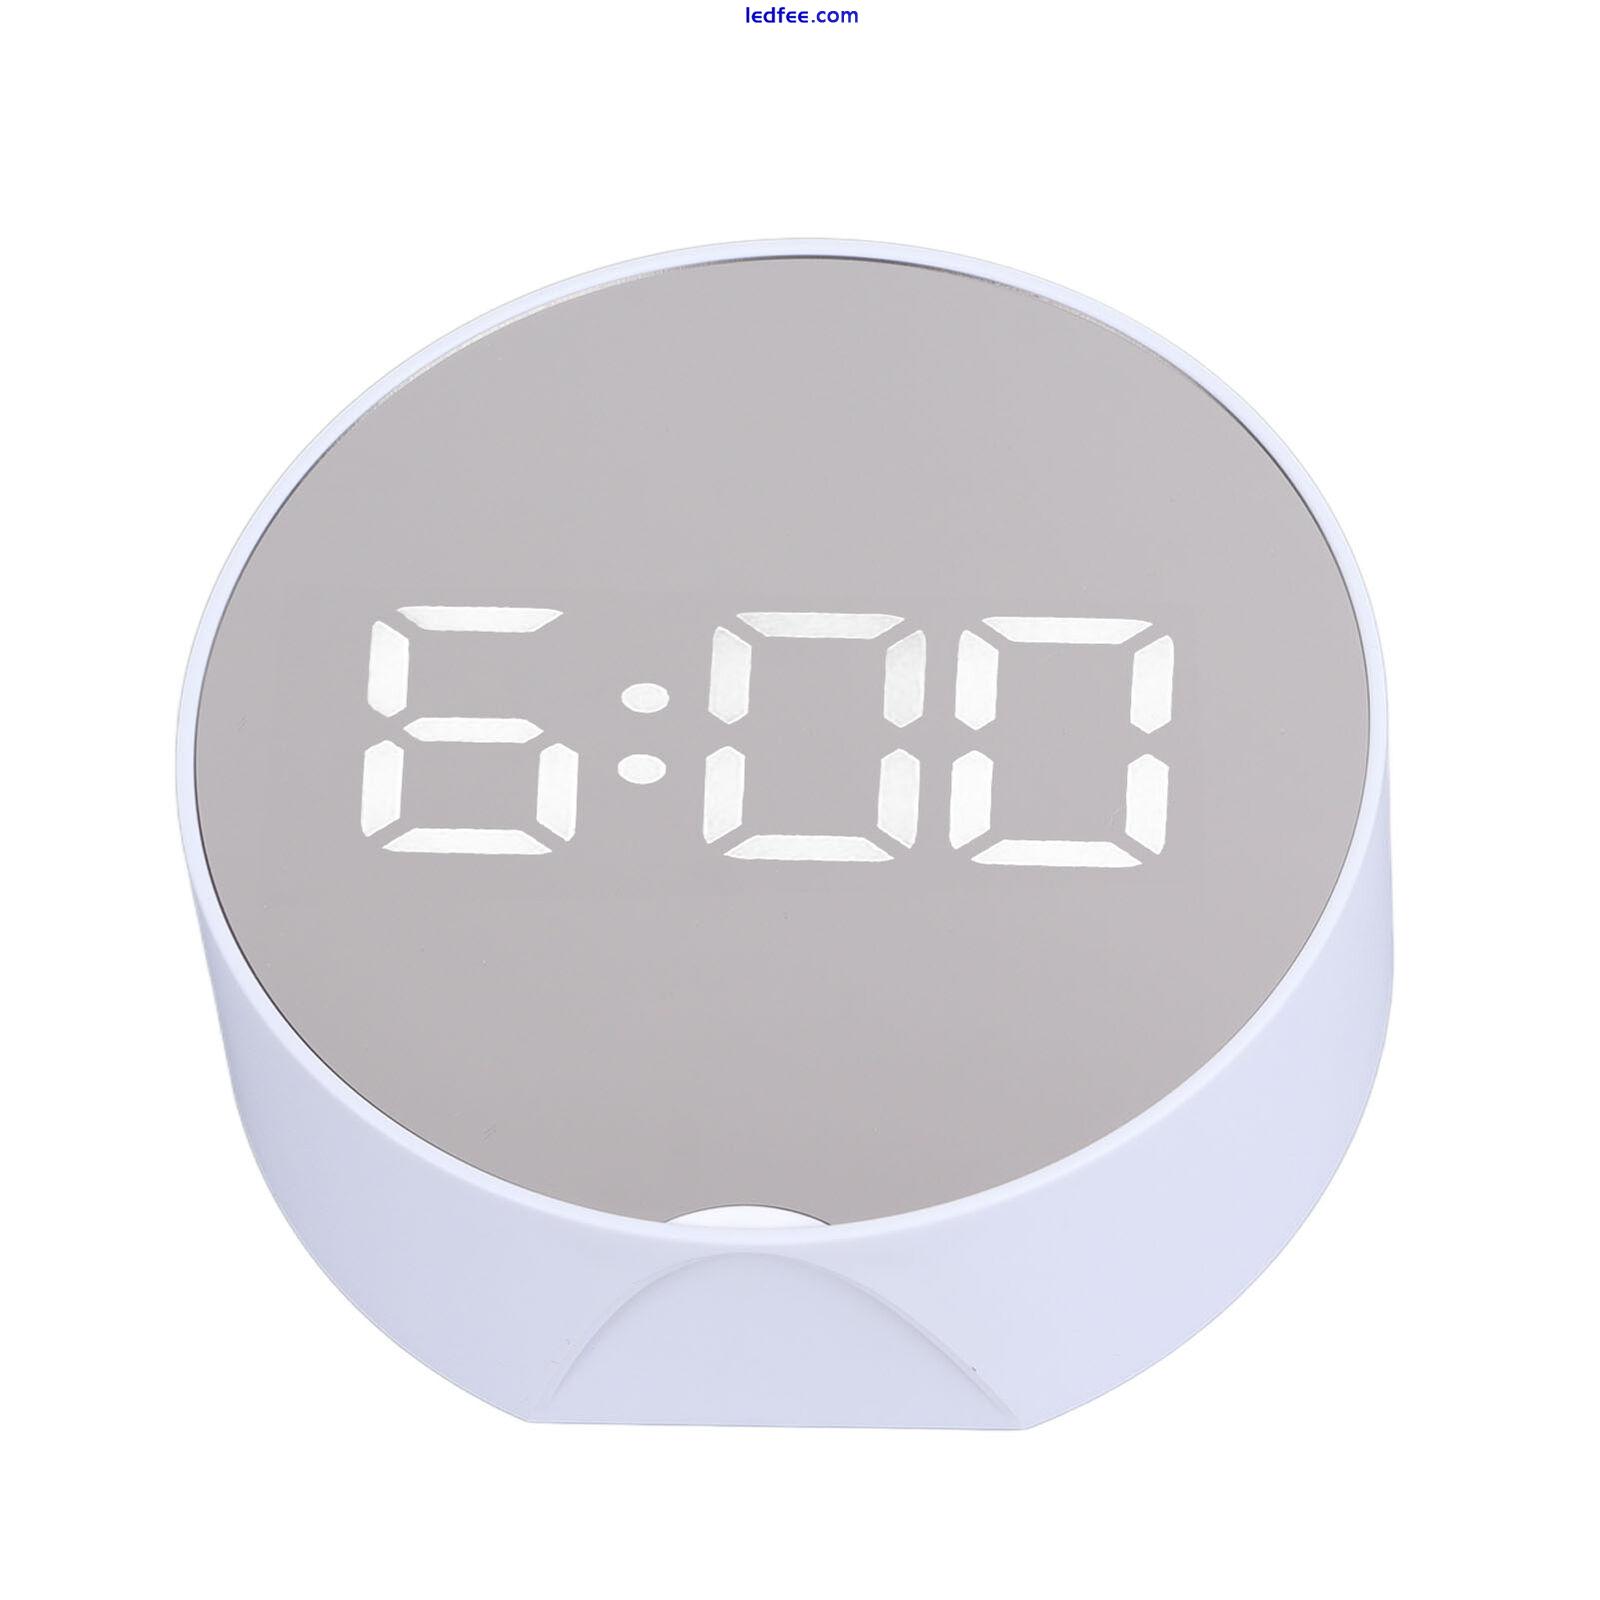 LED Mirror Alarm Easy To Read Portable Mirror Clock For Home 4 